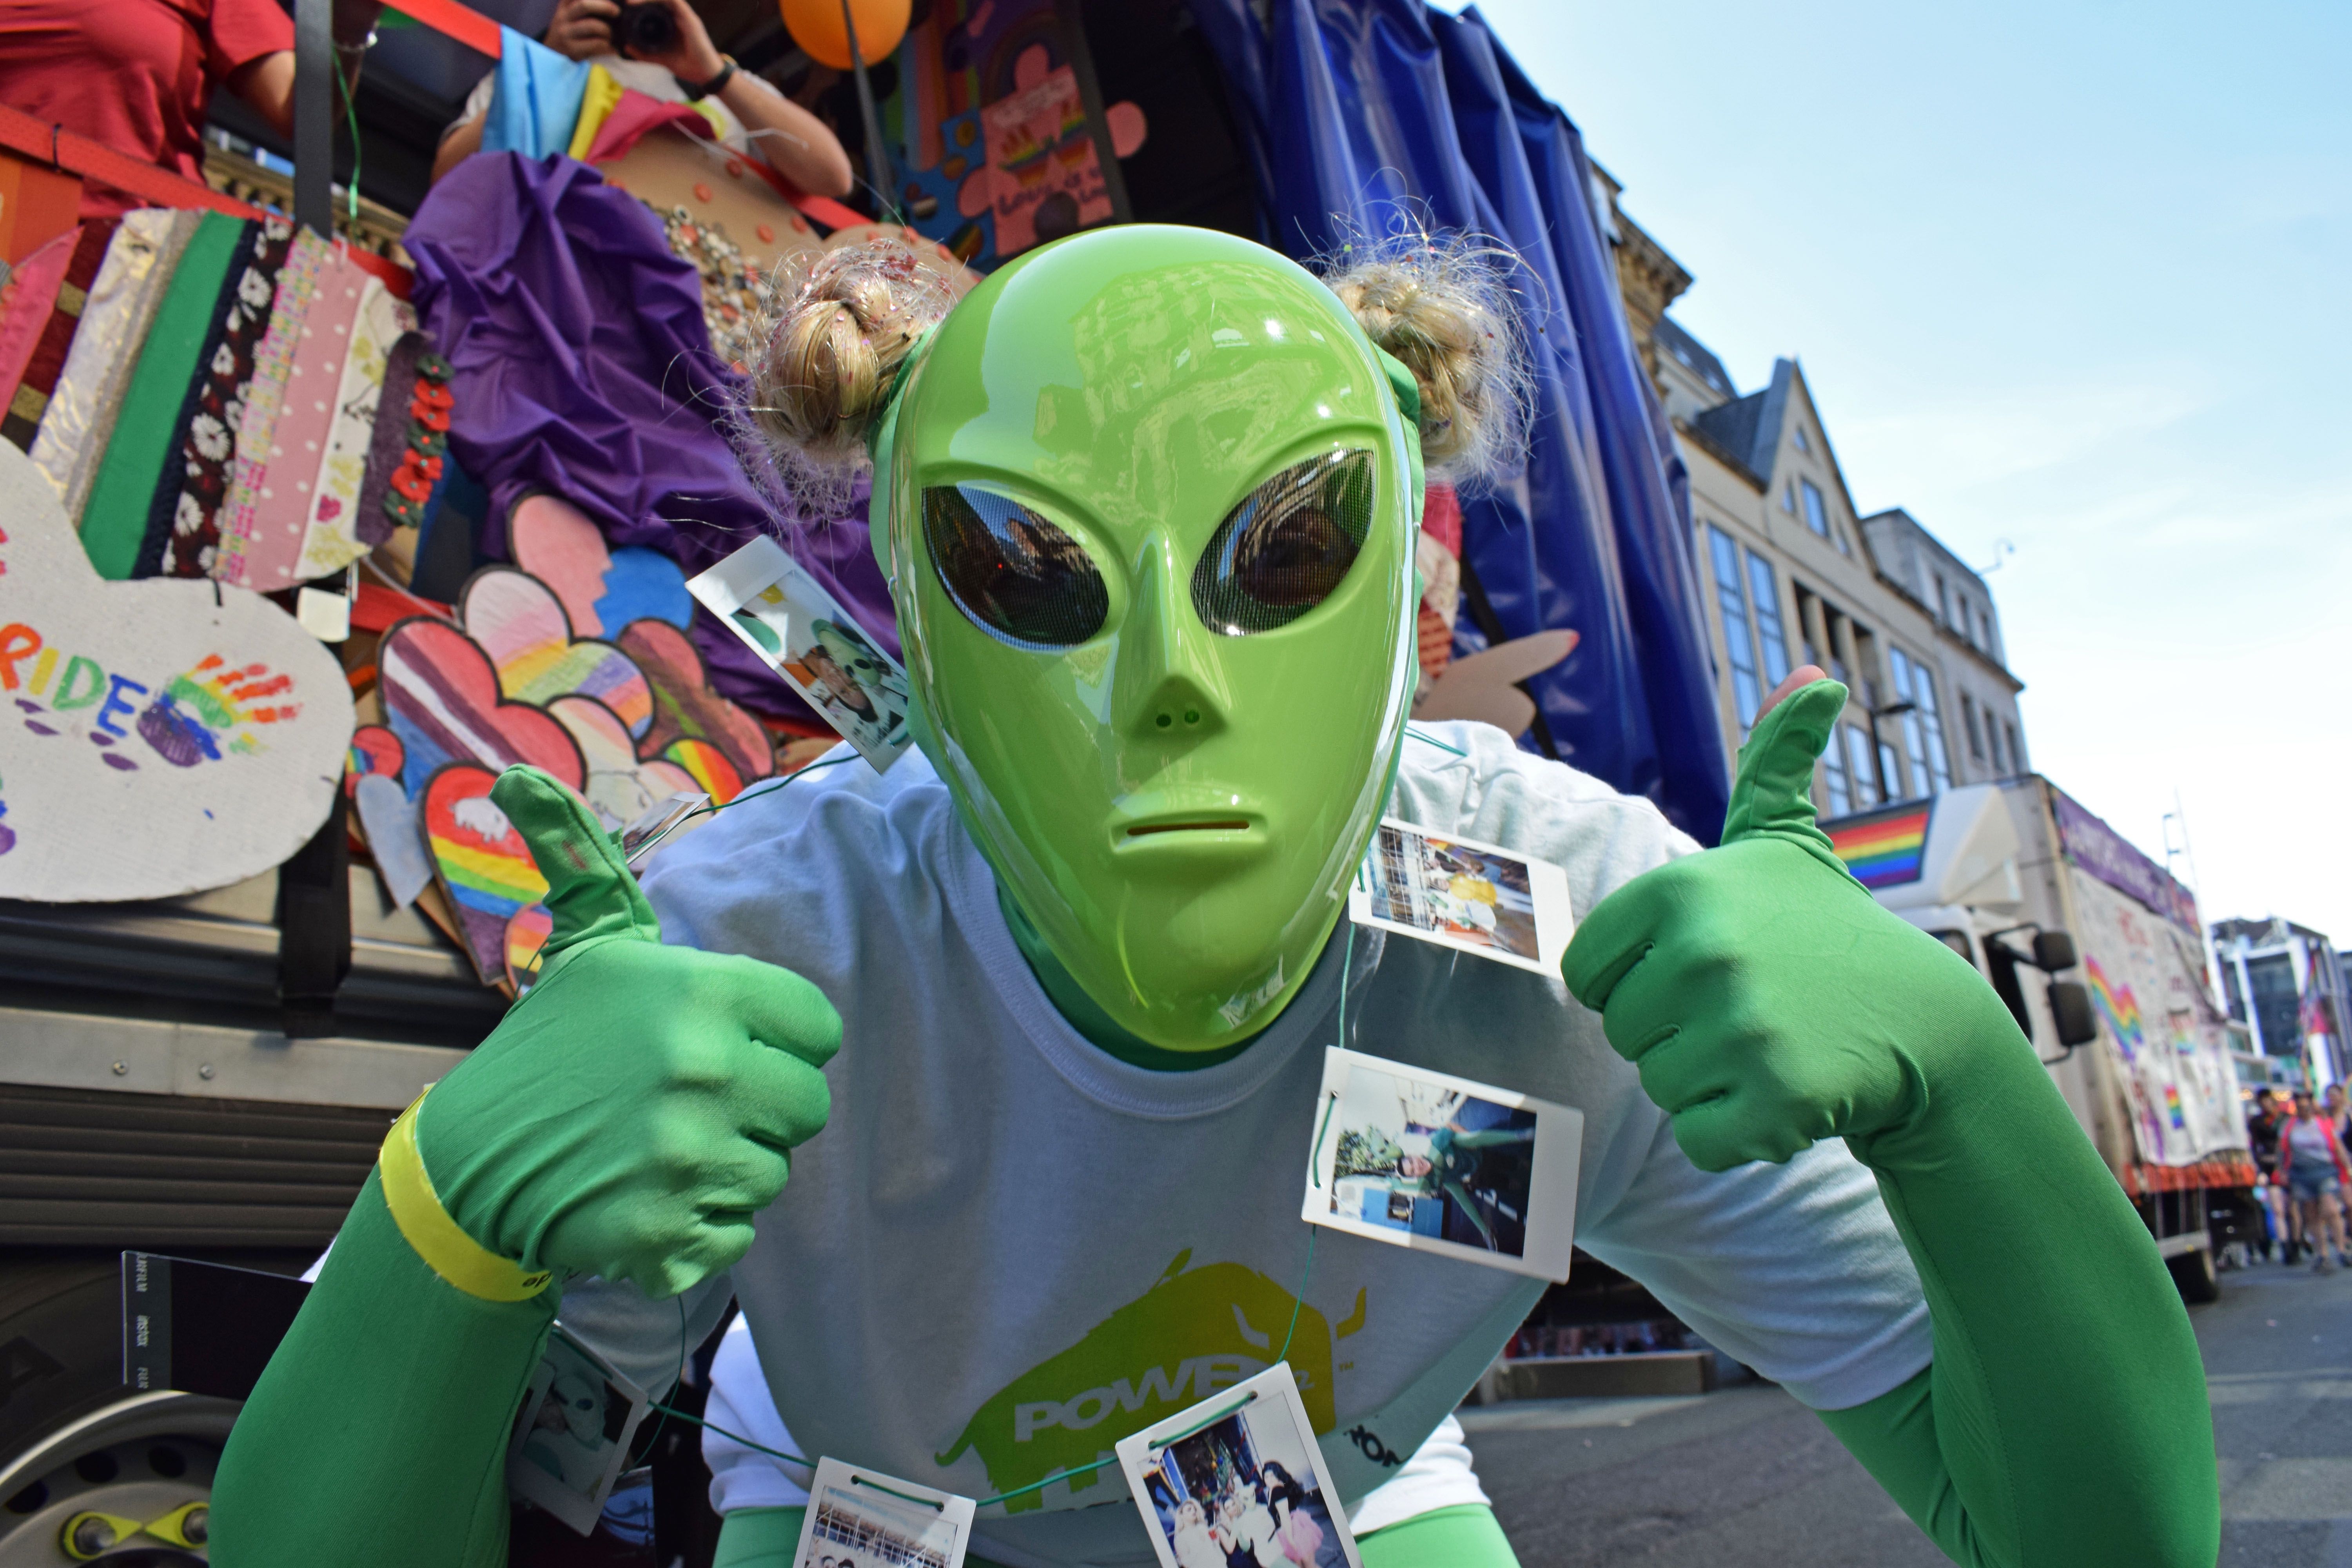 A participant in alien costume with green mask and large eyes making a thumbs up sign